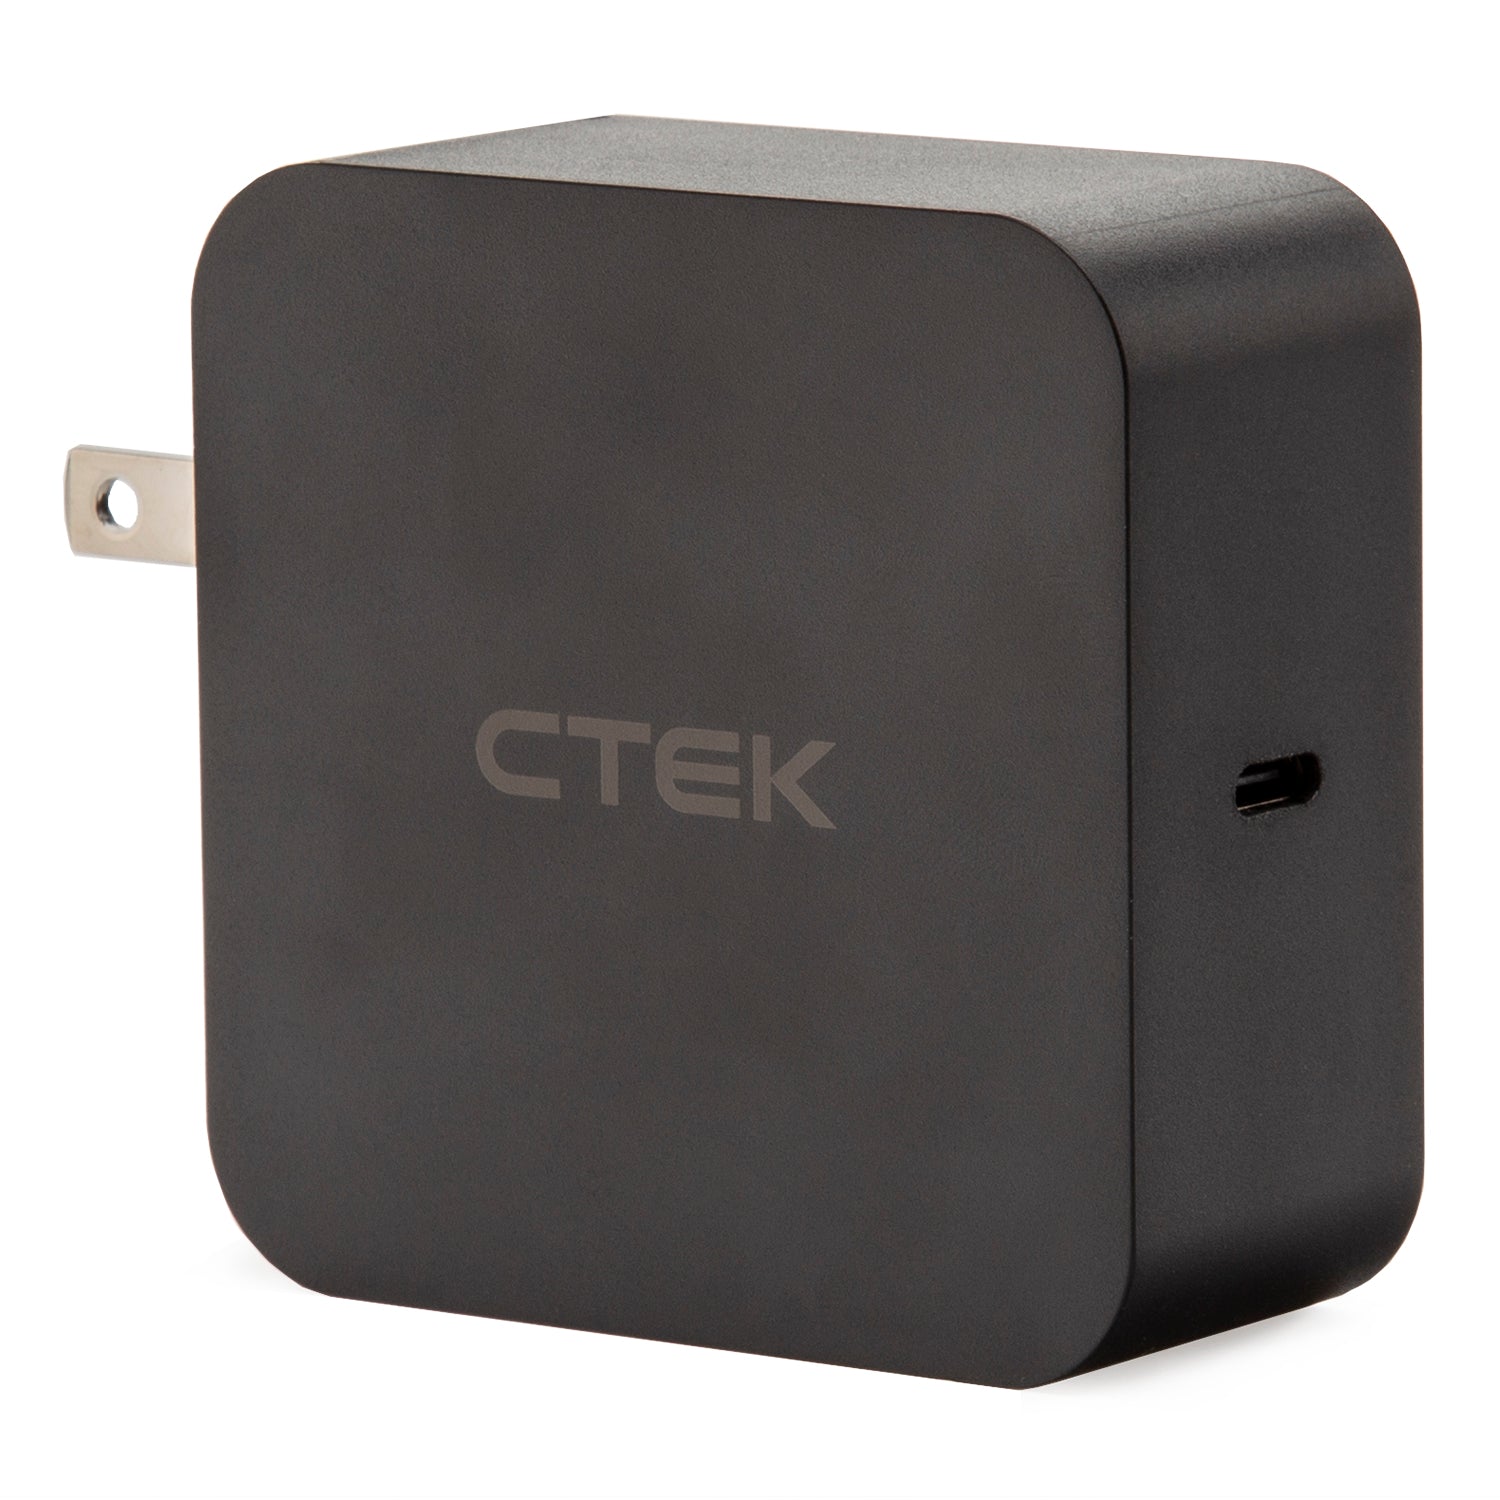 CTEK CS FREE – Multi-functional 4-in-1 portable charger and smart